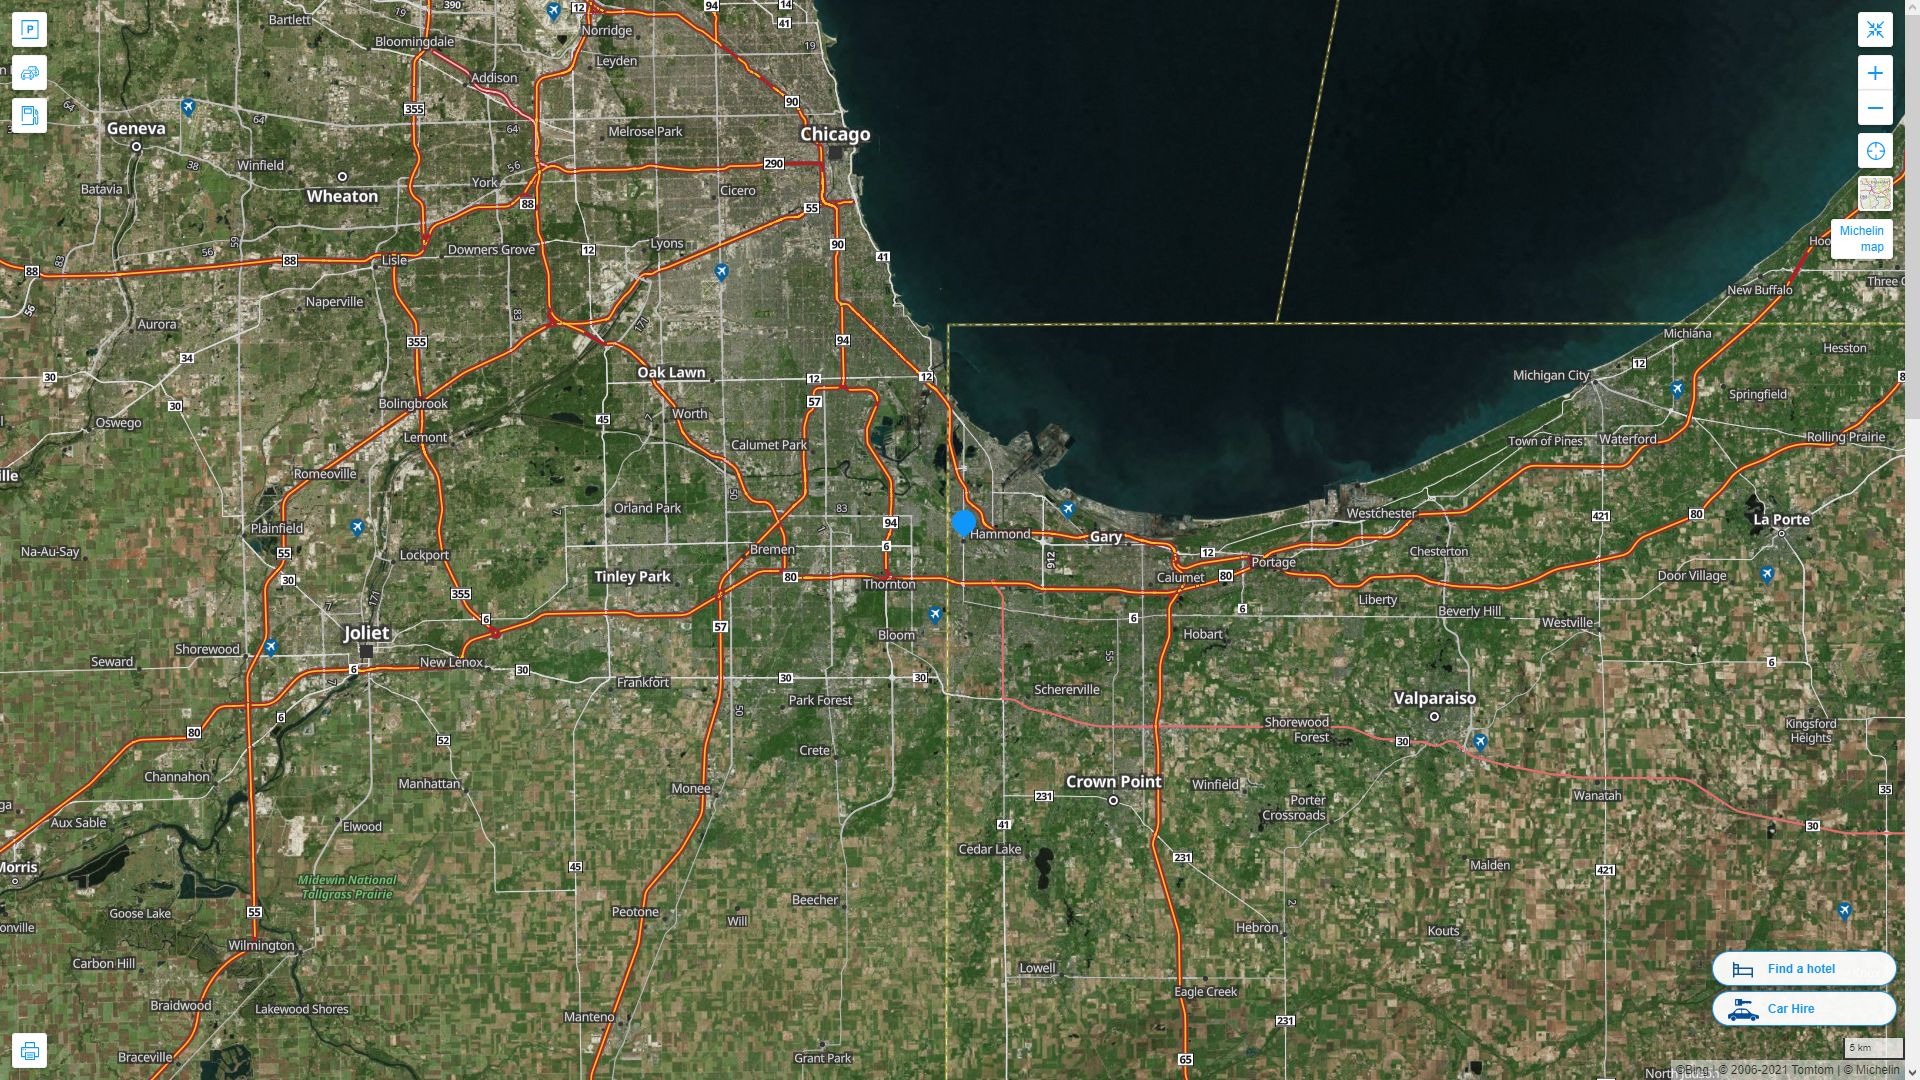 Hammond Indiana Highway and Road Map with Satellite View